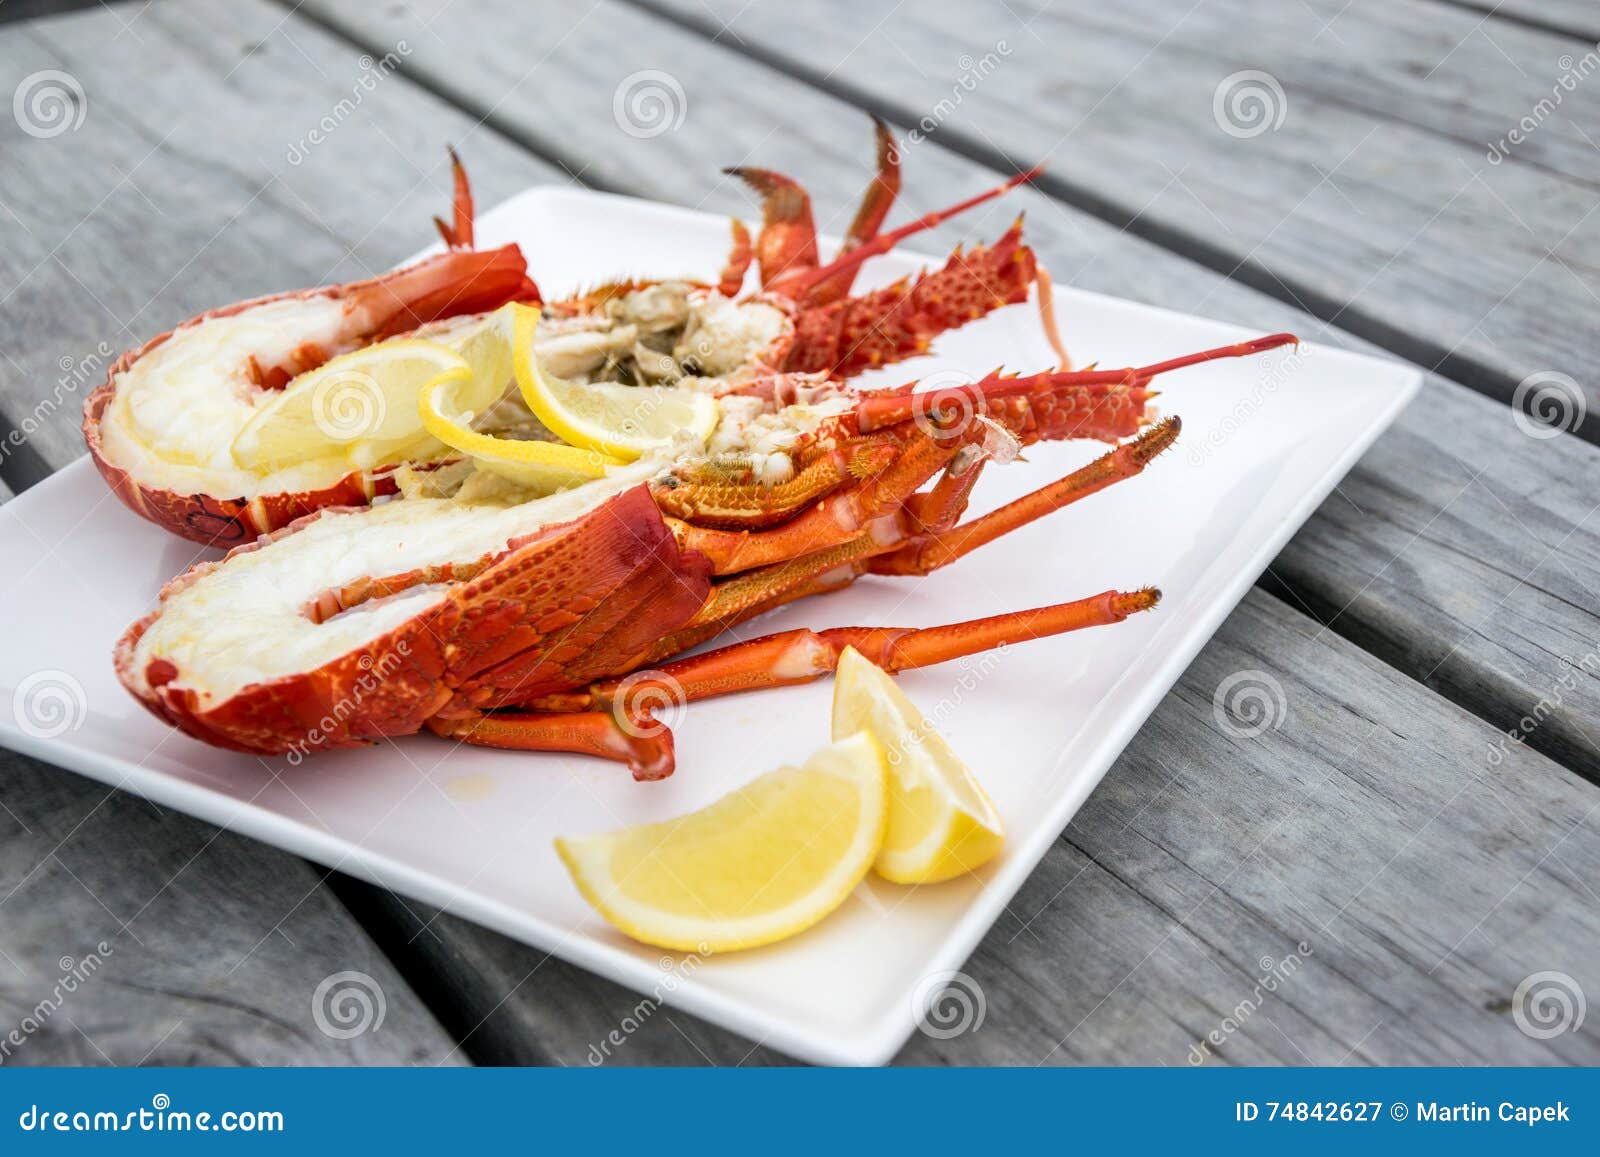 cooked and halved new zealand crayfish